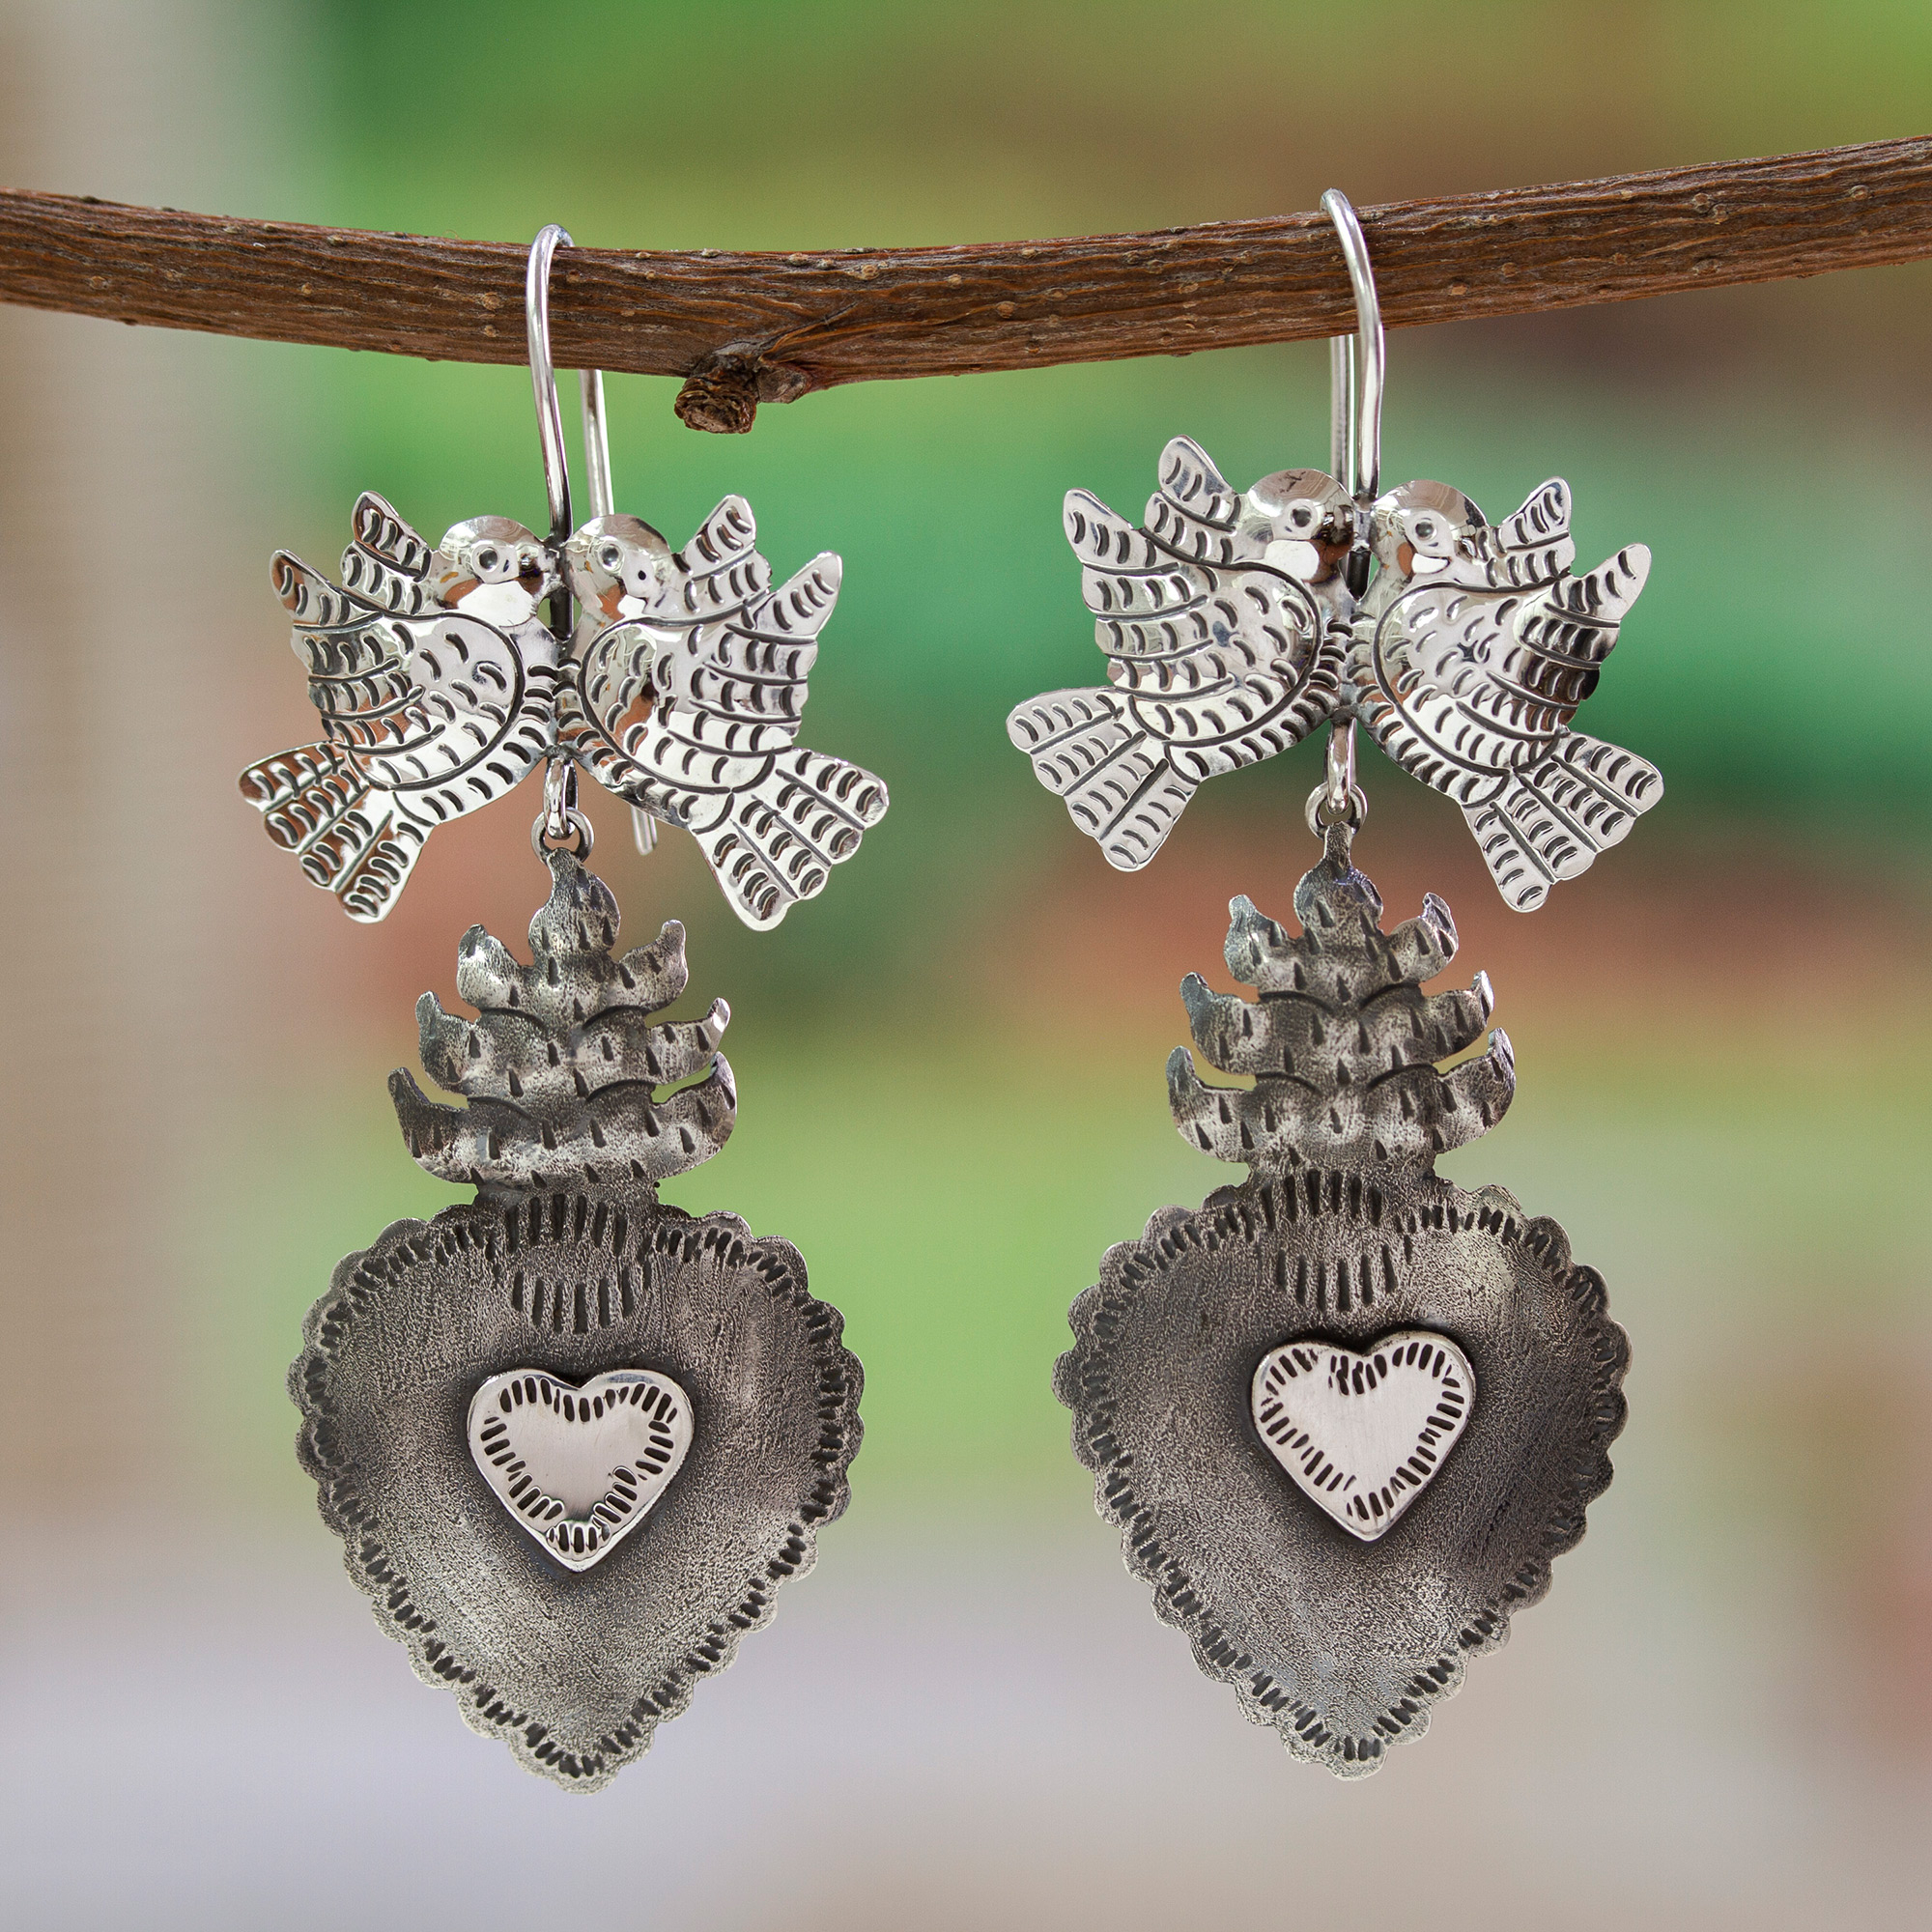 Small planished heart drop earrings - St Justin